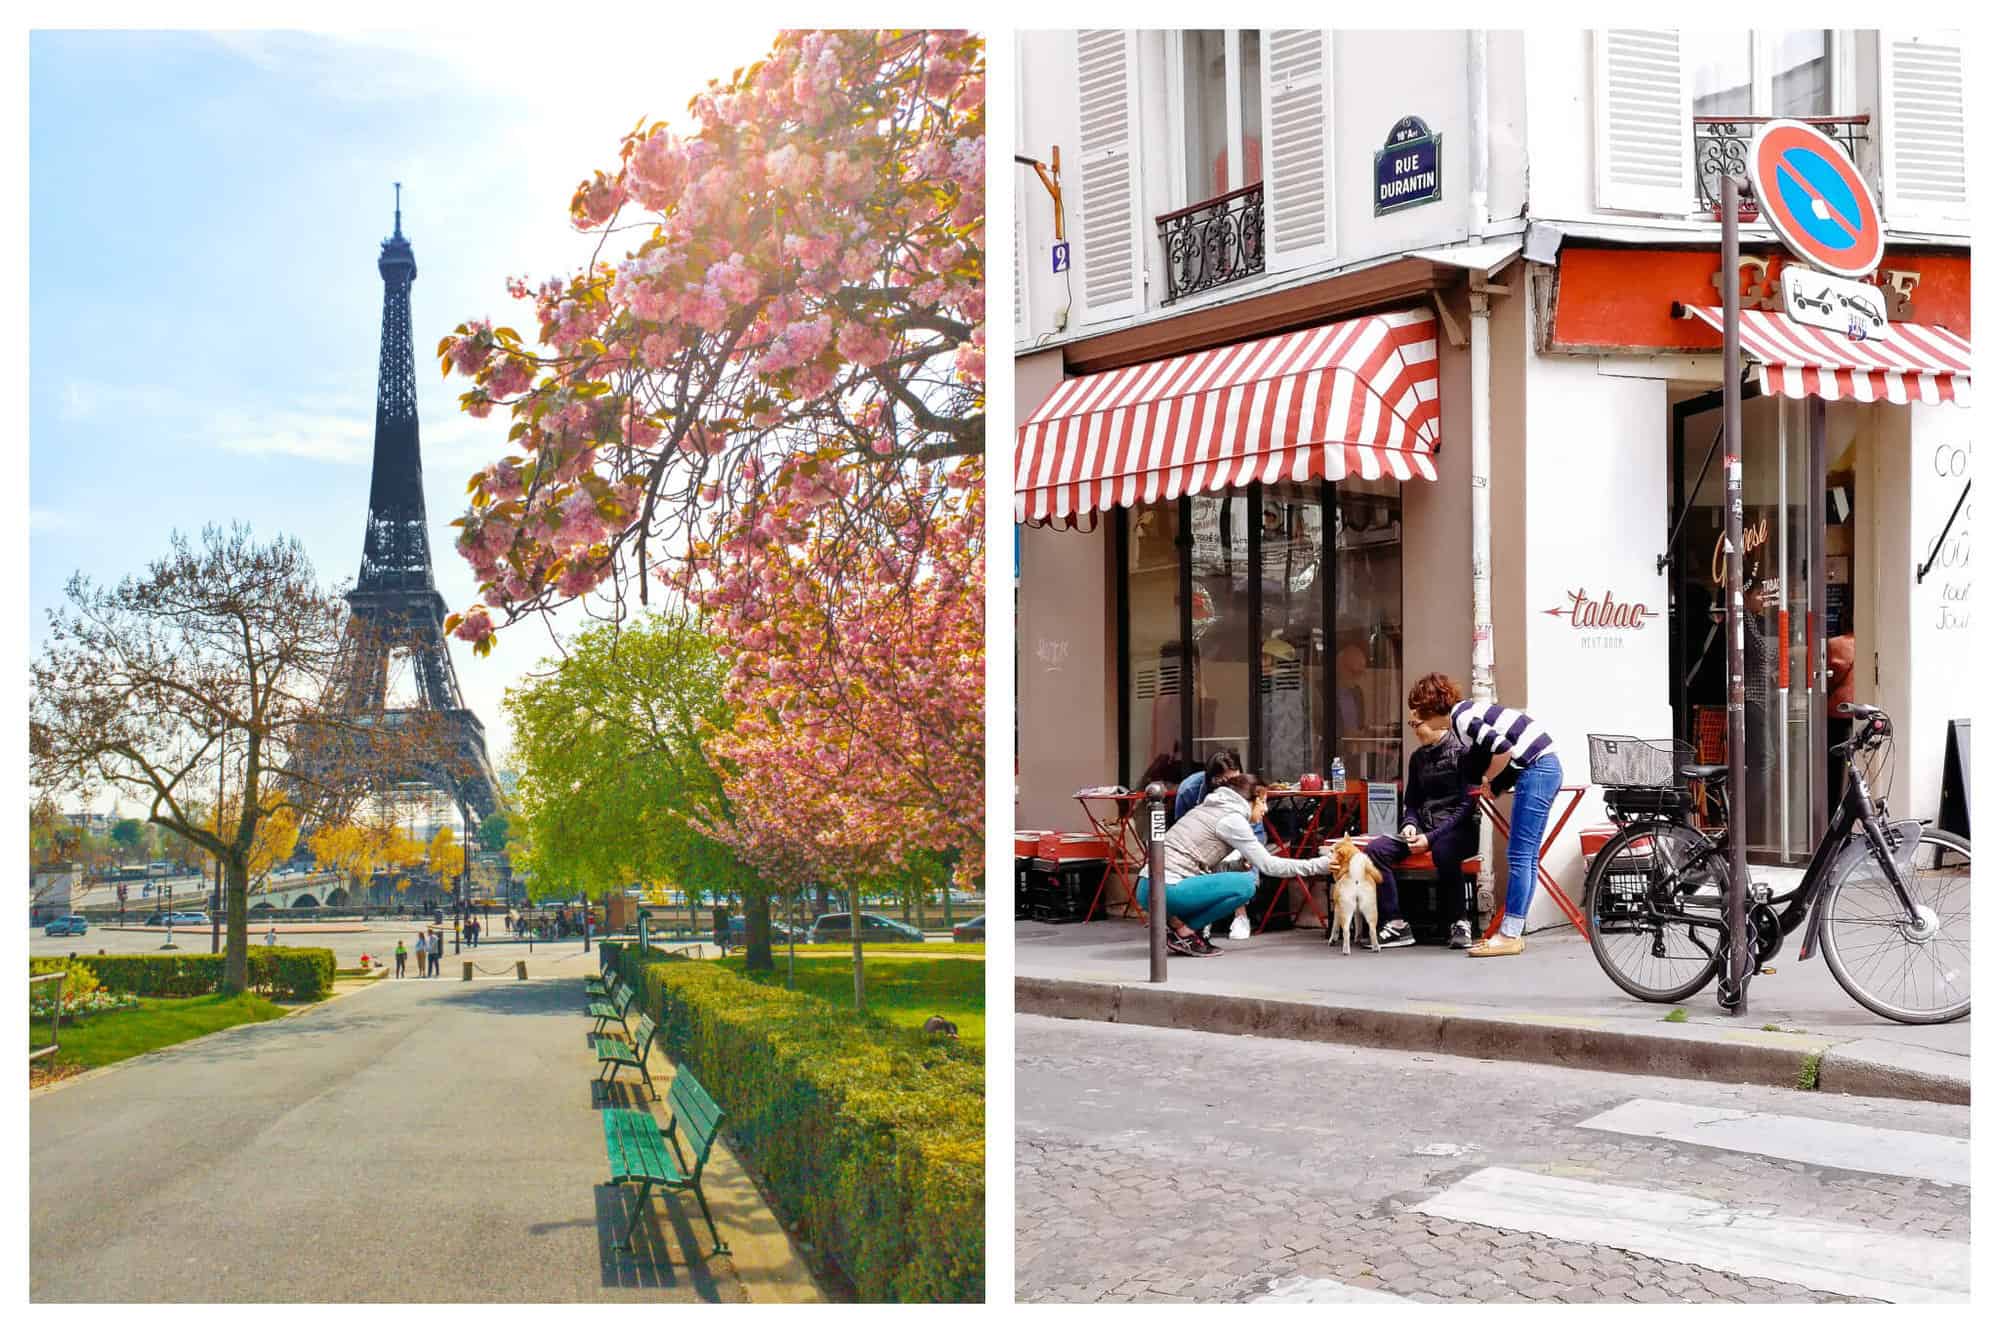 Left: a cherry blossom tree in full bloom at the Trocadero gardens with the Eiffel Tower in the background. Right: people petting a dog at a table outside the Cafe Tabac in Montmartre.